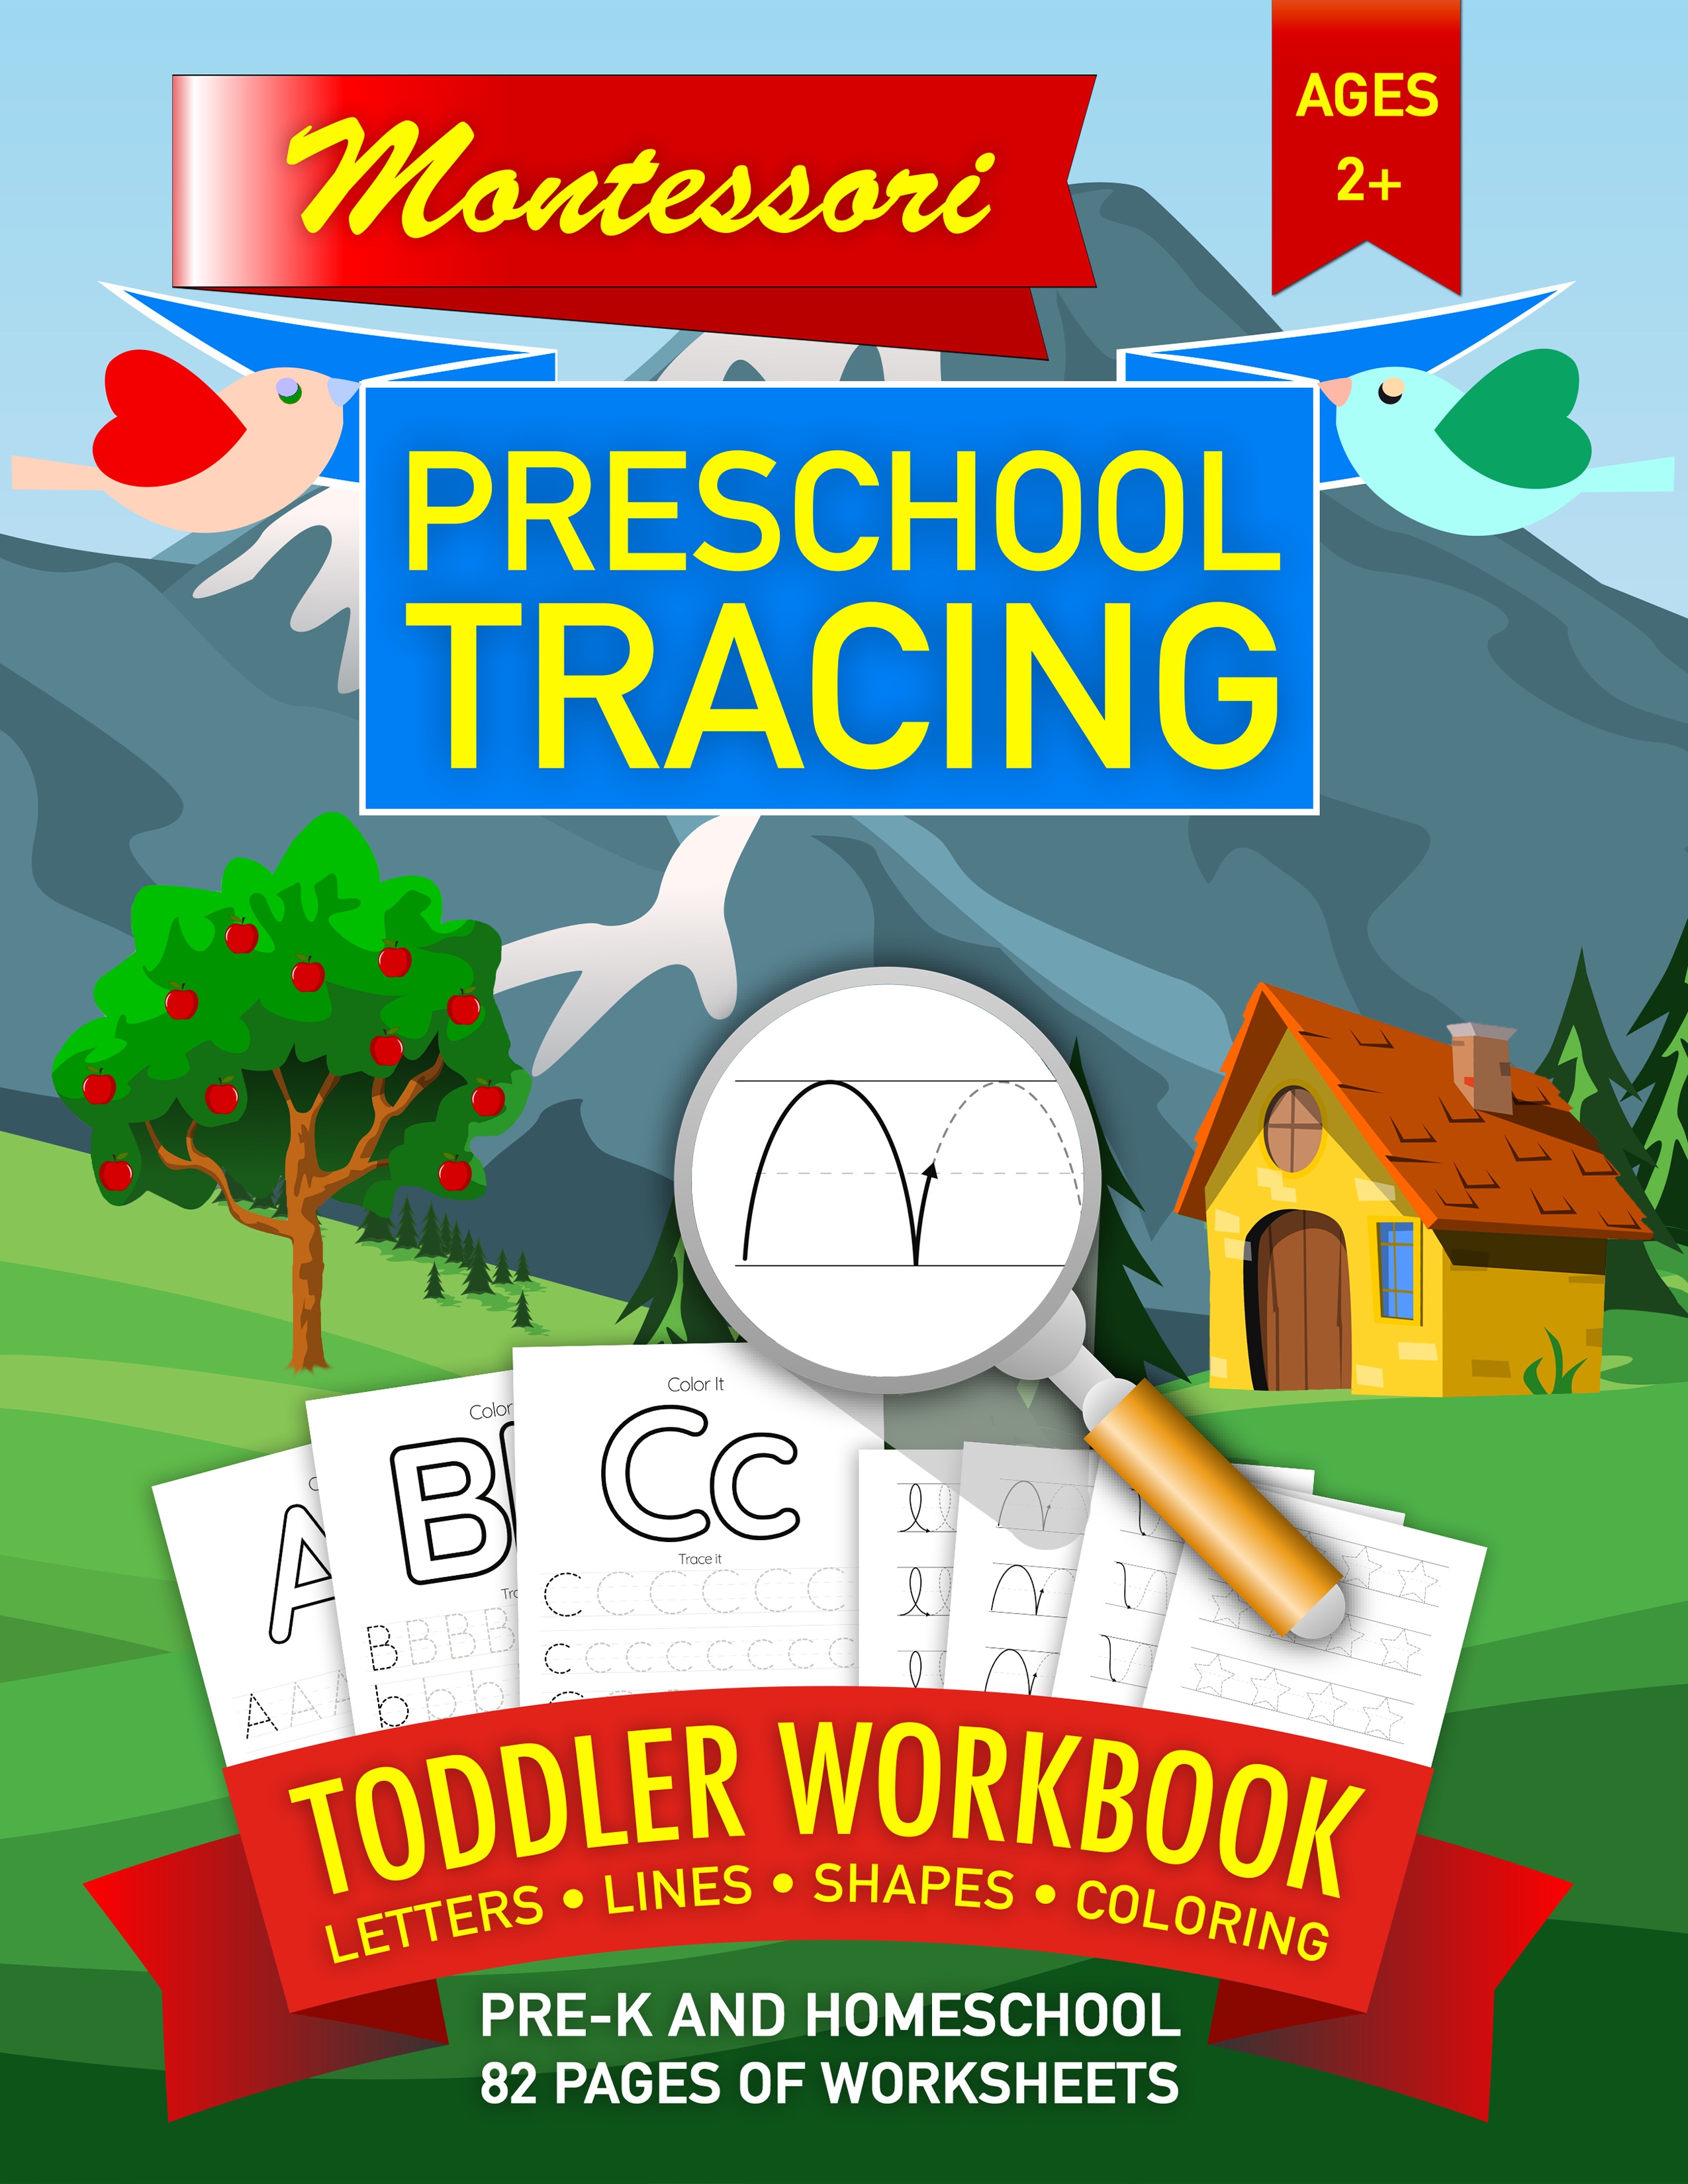 Montessori Workbook • Toddler Preschool Tracing • Pre-K and Homeschool • Letters • Lines • Shapes • Coloring: Learn to Trace Beginner Worksheets for Preschool